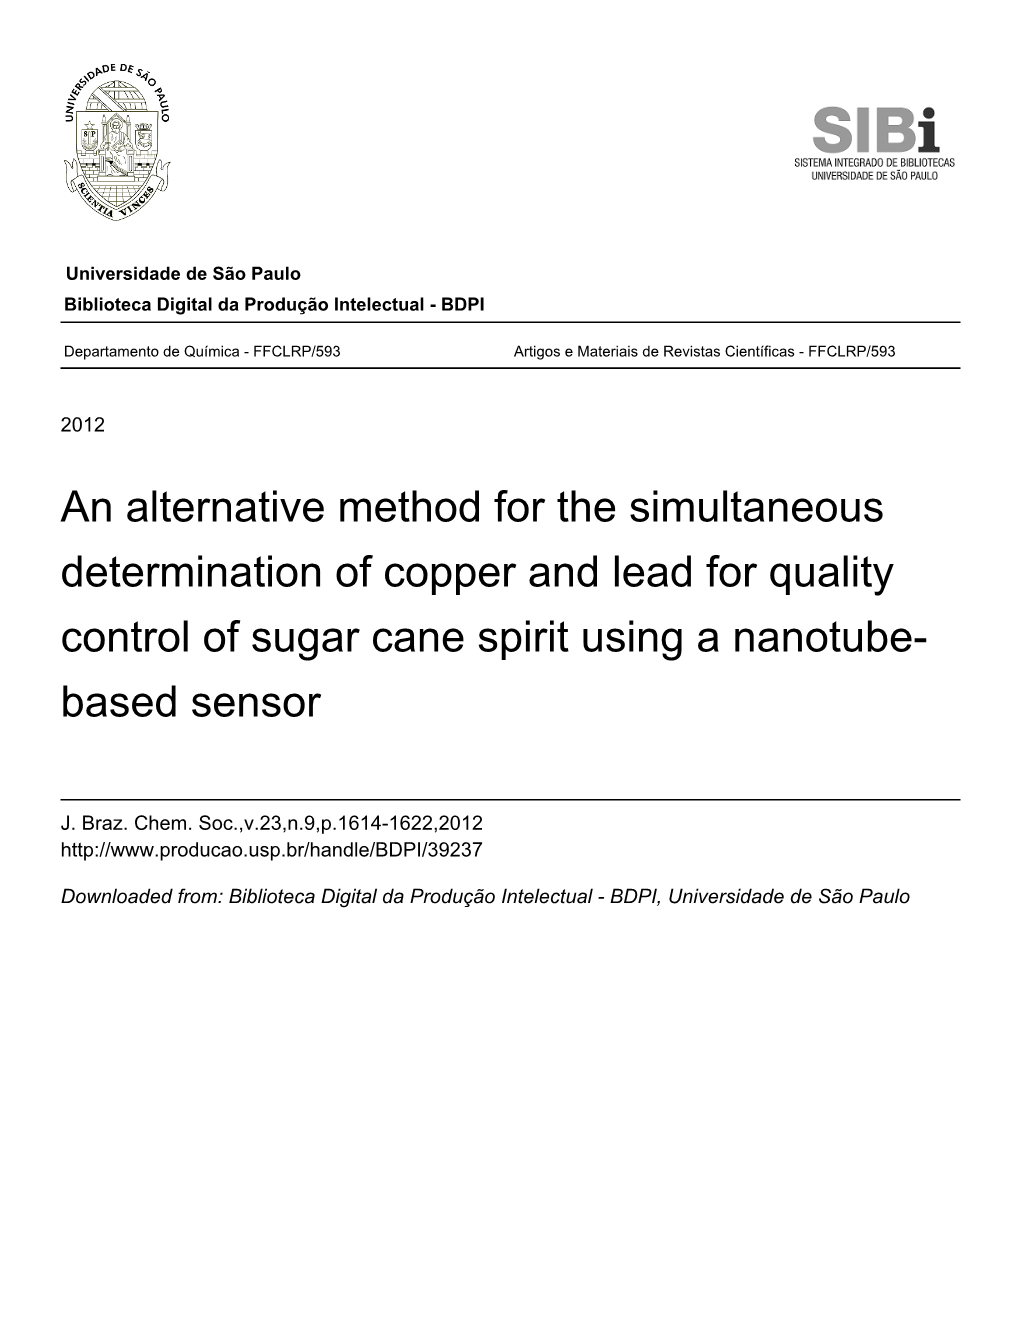 An Alternative Method for the Simultaneous Determination of Copper and Lead for Quality Control of Sugar Cane Spirit Using a Nanotube- Based Sensor